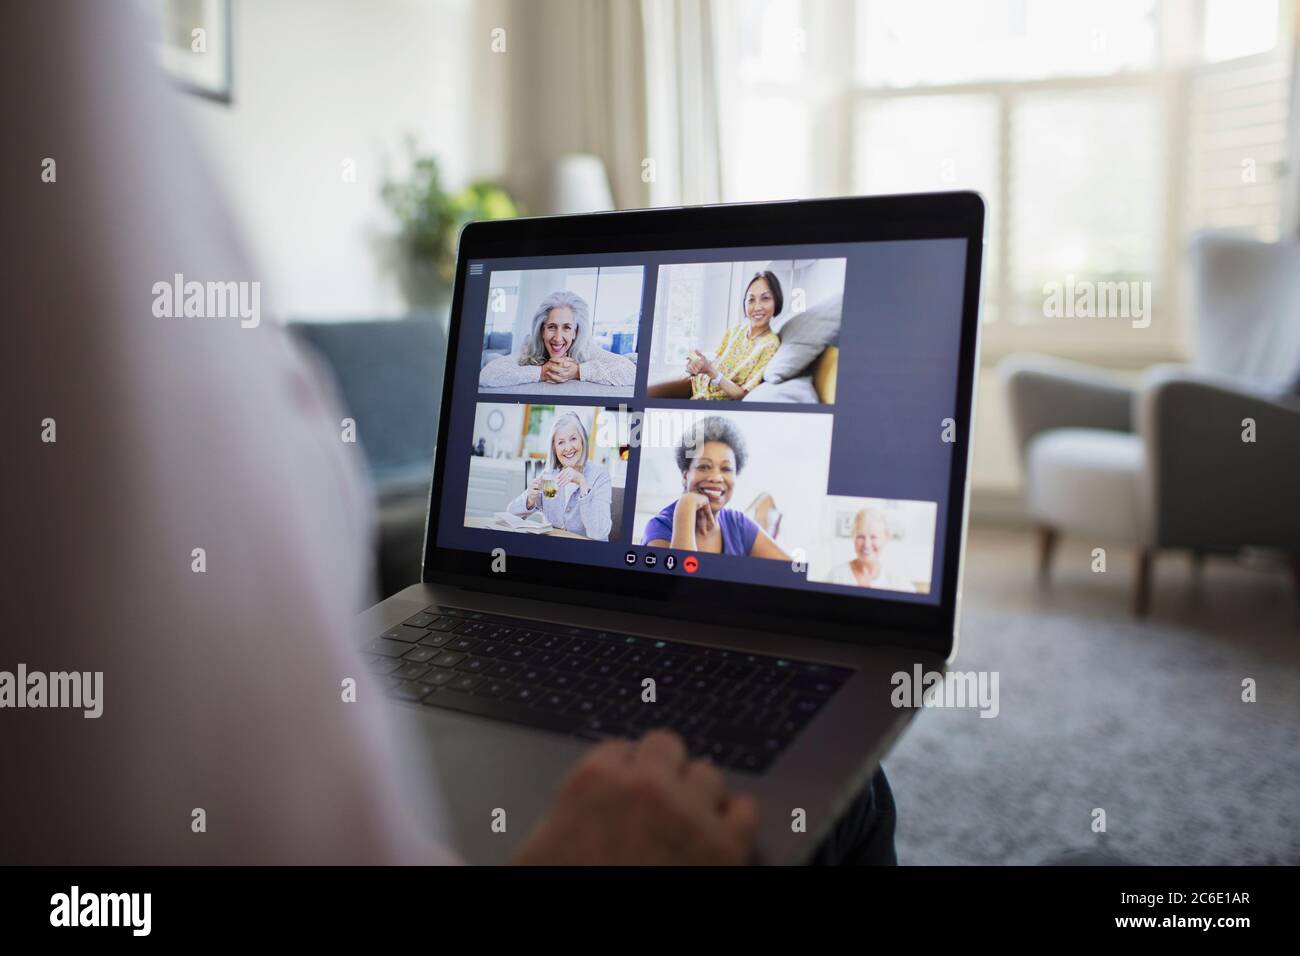 Senior women video conferencing on laptop screen Stock Photo